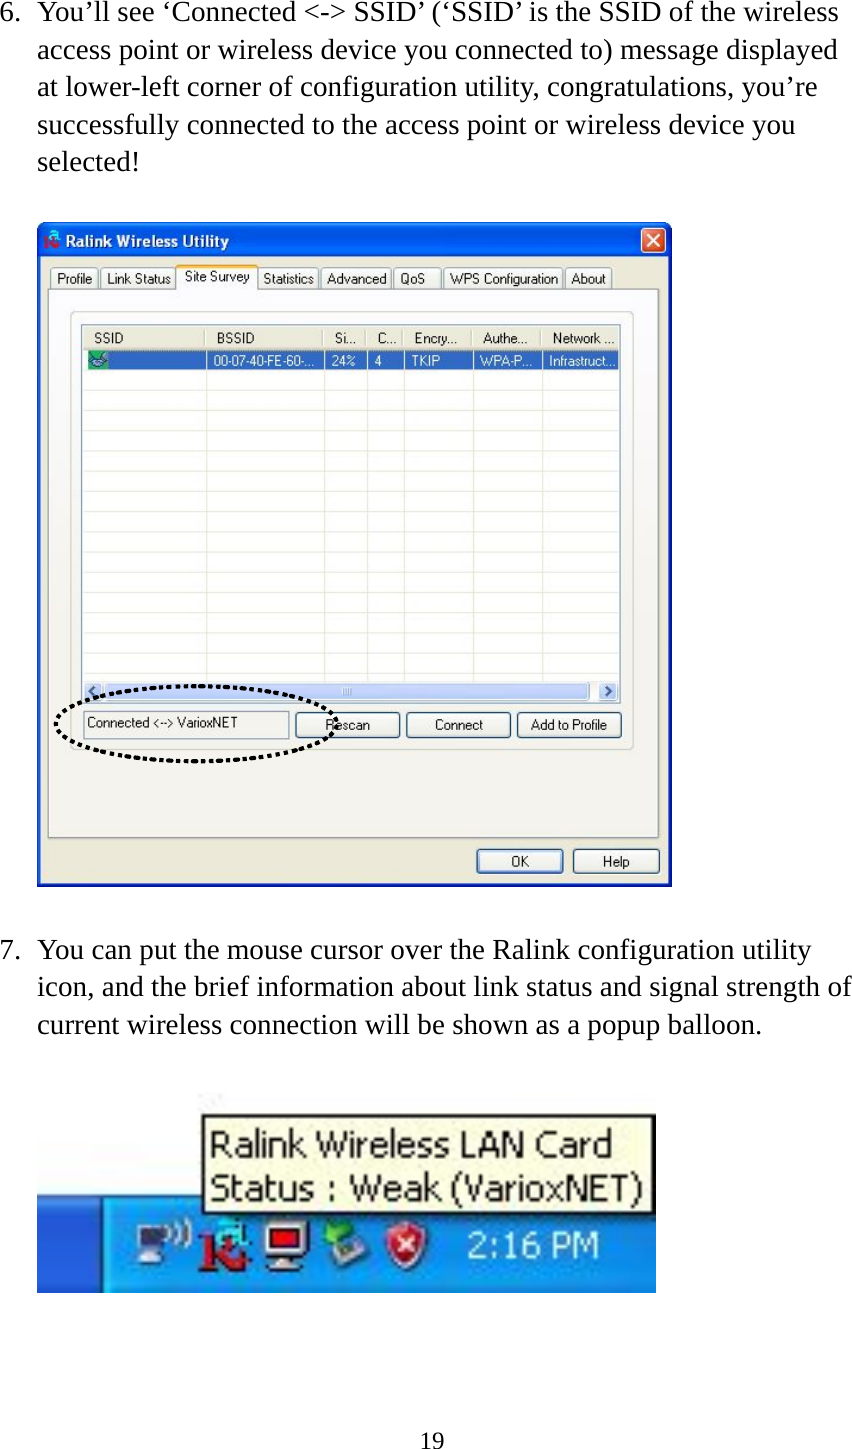  19 6. You’ll see ‘Connected &lt;-&gt; SSID’ (‘SSID’ is the SSID of the wireless access point or wireless device you connected to) message displayed at lower-left corner of configuration utility, congratulations, you’re successfully connected to the access point or wireless device you selected!    7. You can put the mouse cursor over the Ralink configuration utility icon, and the brief information about link status and signal strength of current wireless connection will be shown as a popup balloon.   